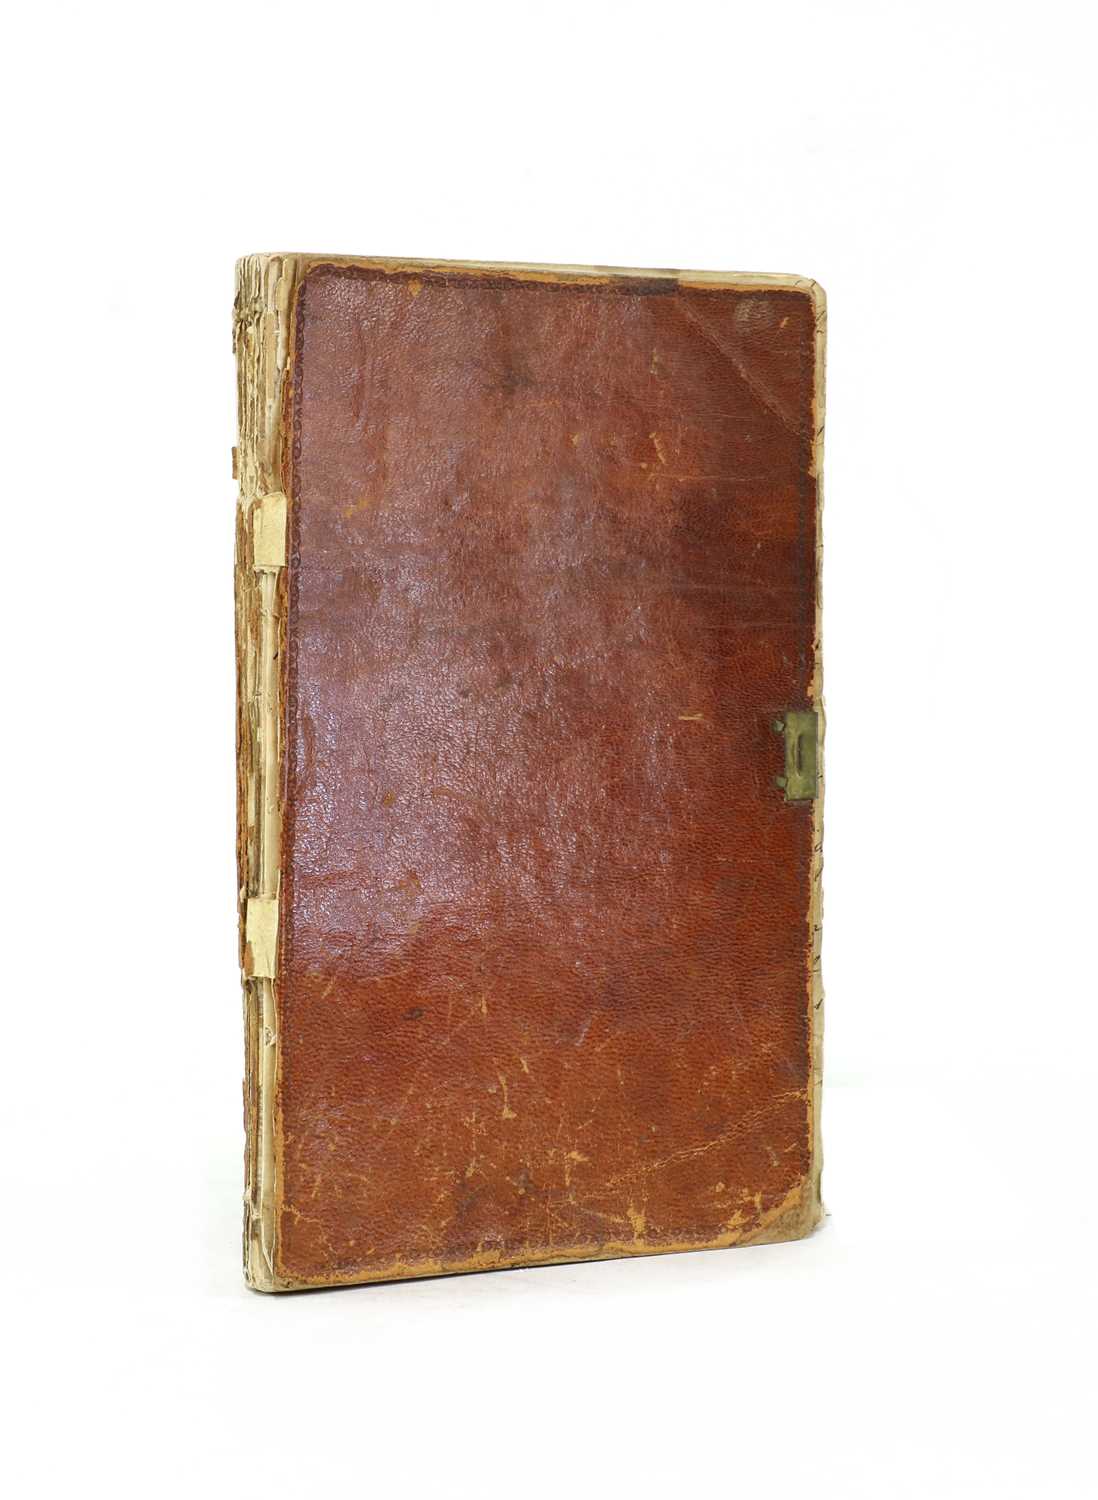 Lot 148 - 1827 continental TRAVEL DIARY.